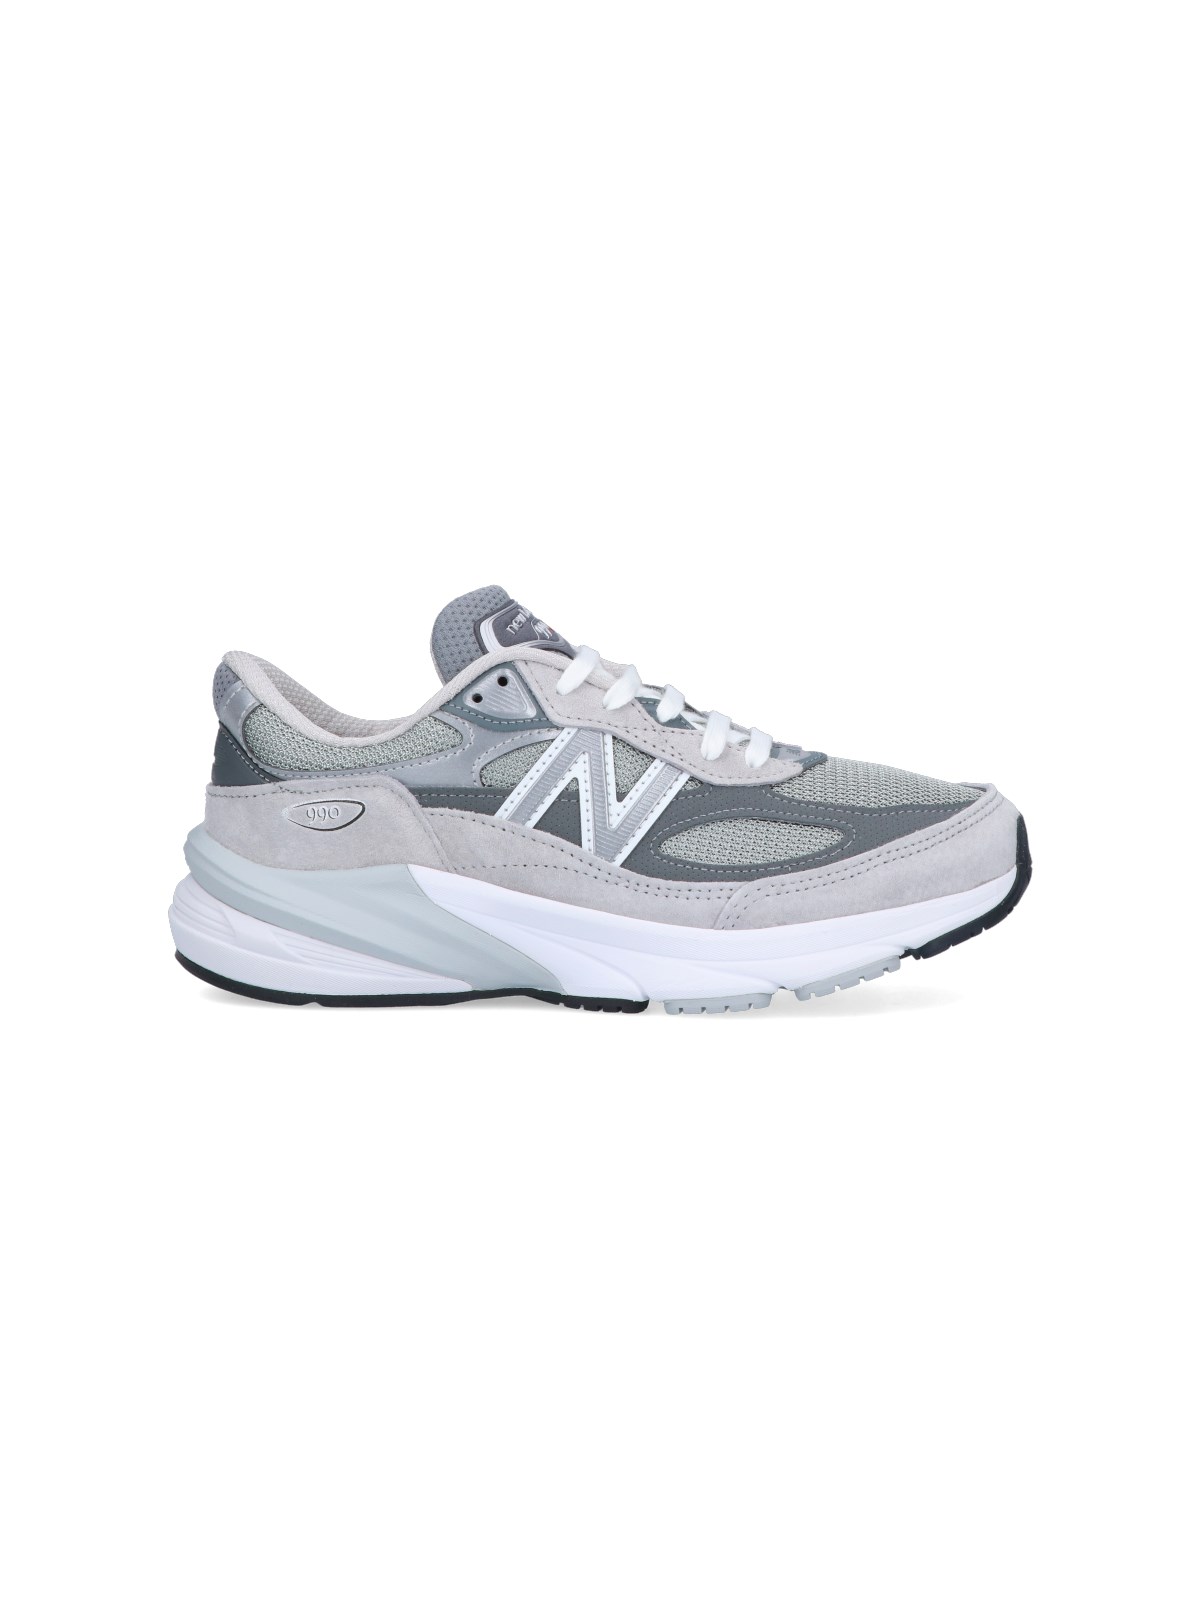 New Balance 990v6 Sneakers In Gray